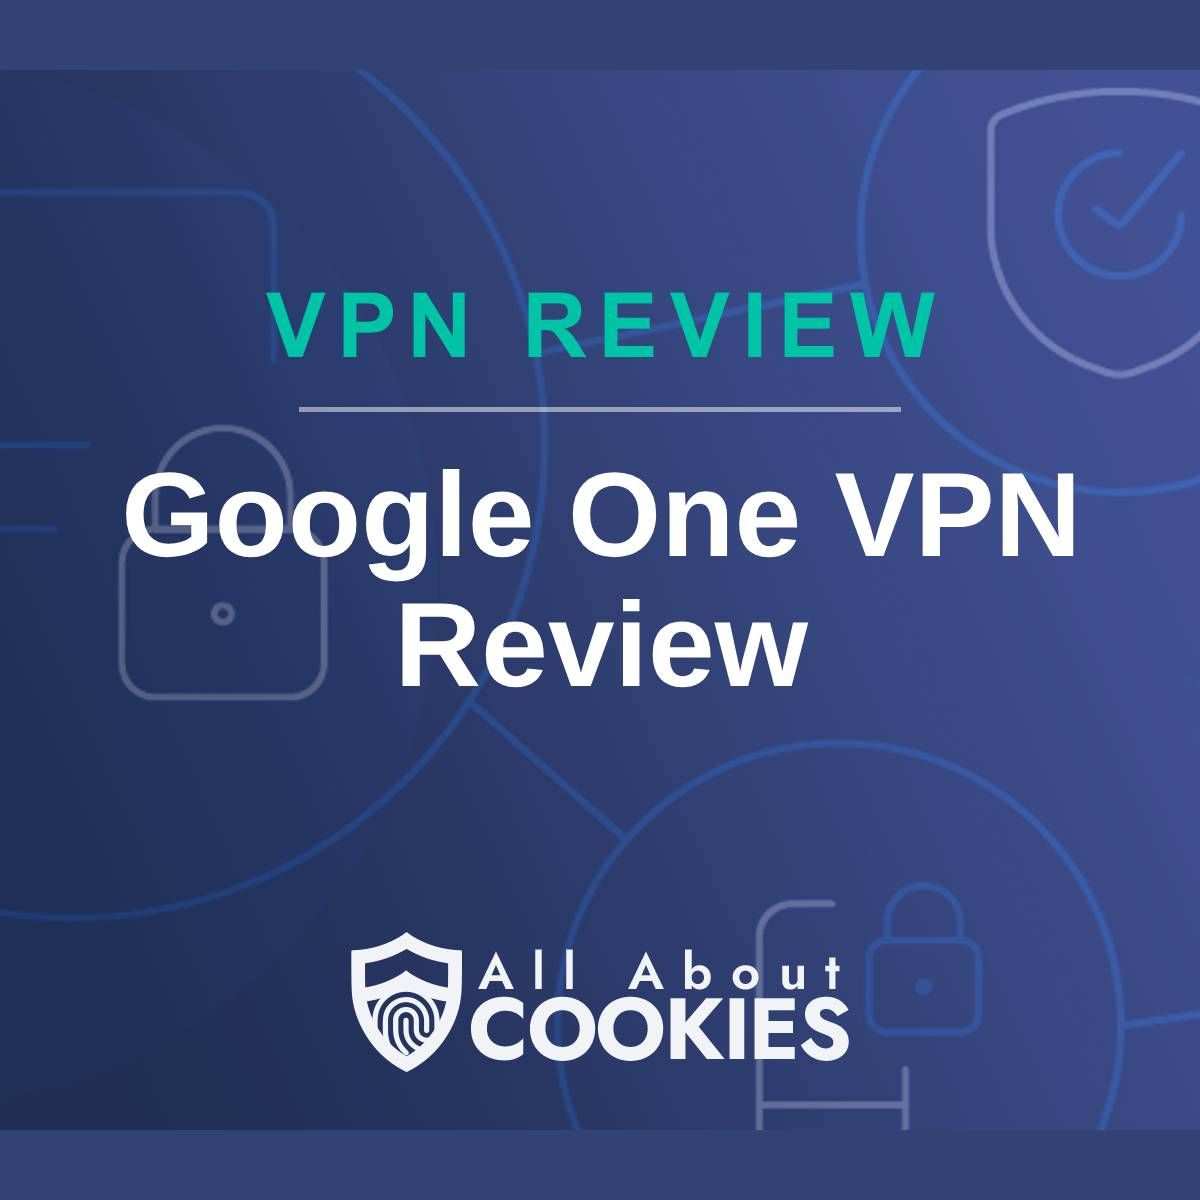 A blue background with images of locks and shields with the text &quot;VPN Review Google One VPN Review&quot; and the All About Cookies logo. 